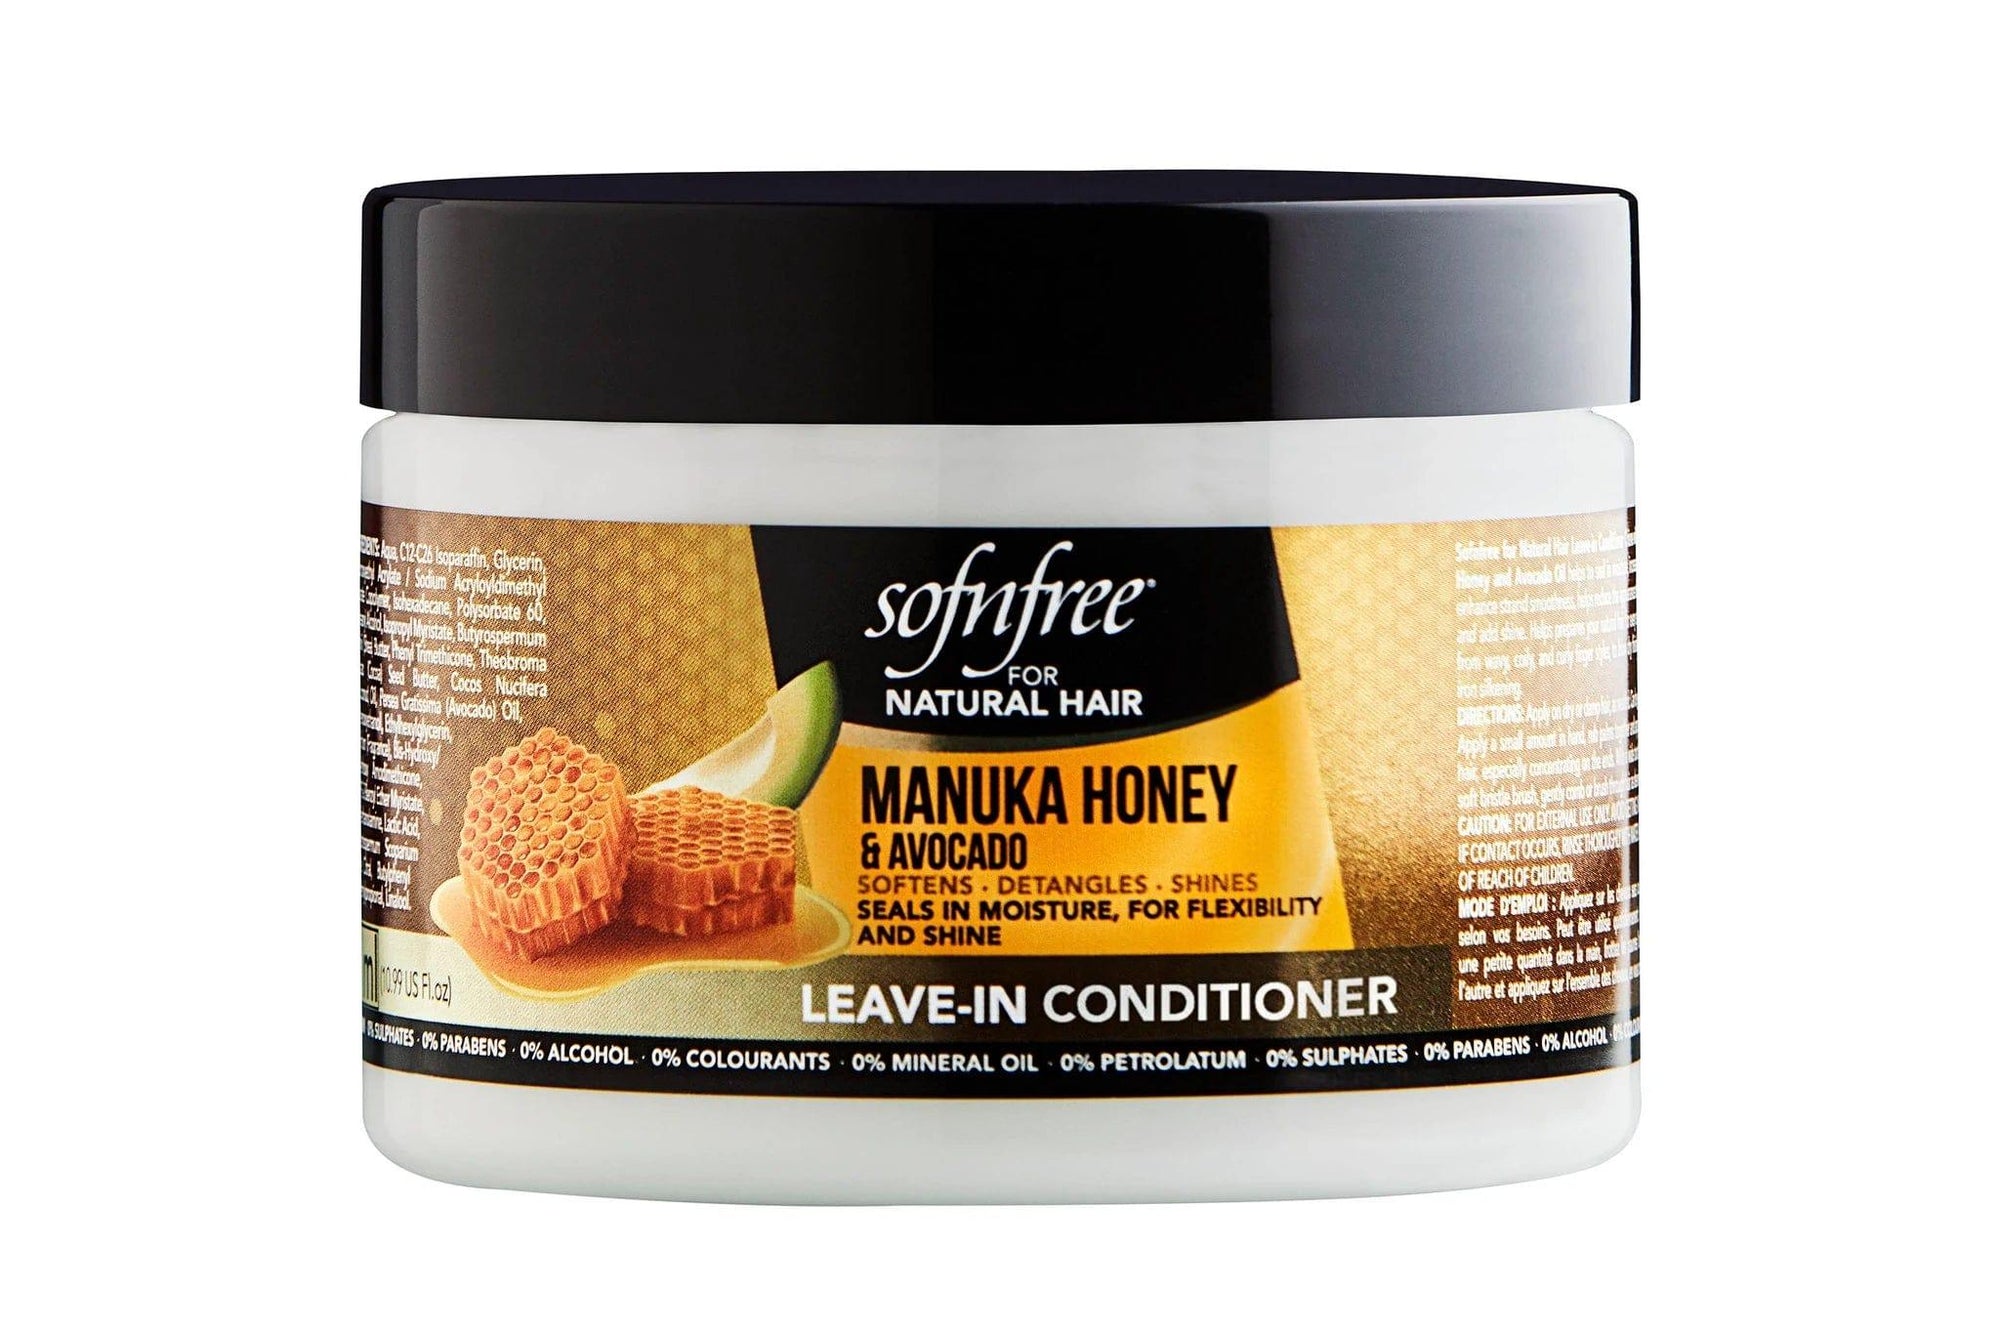 Leave-In Conditioner with Manuka Honey & Avocado Oil- sofnfree